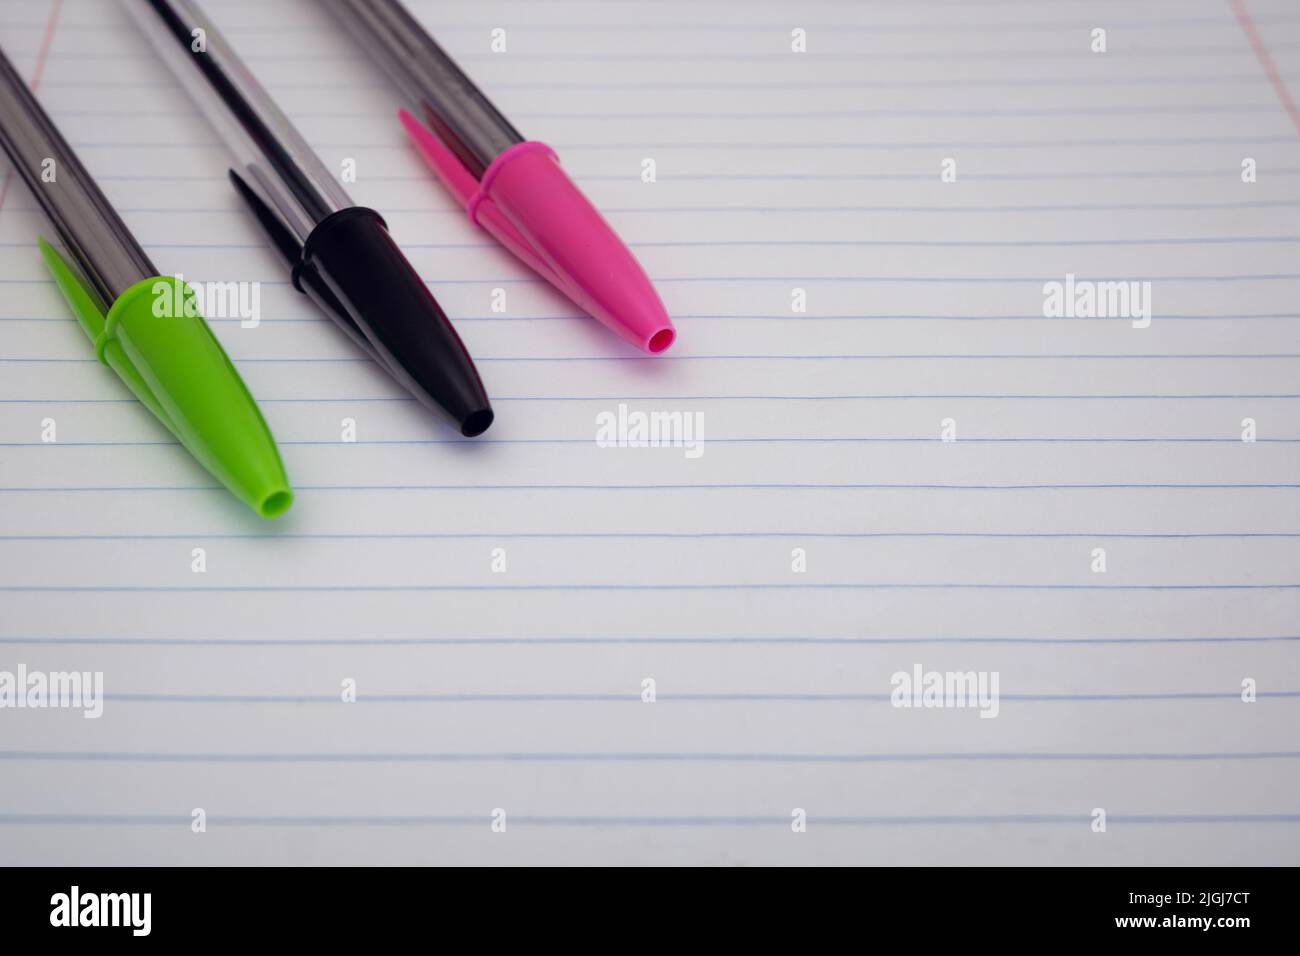 Close-up of three pens with caps on resting on a lined paper sheet. Background of green, black and pink pens with selective focus and empty space Stock Photo